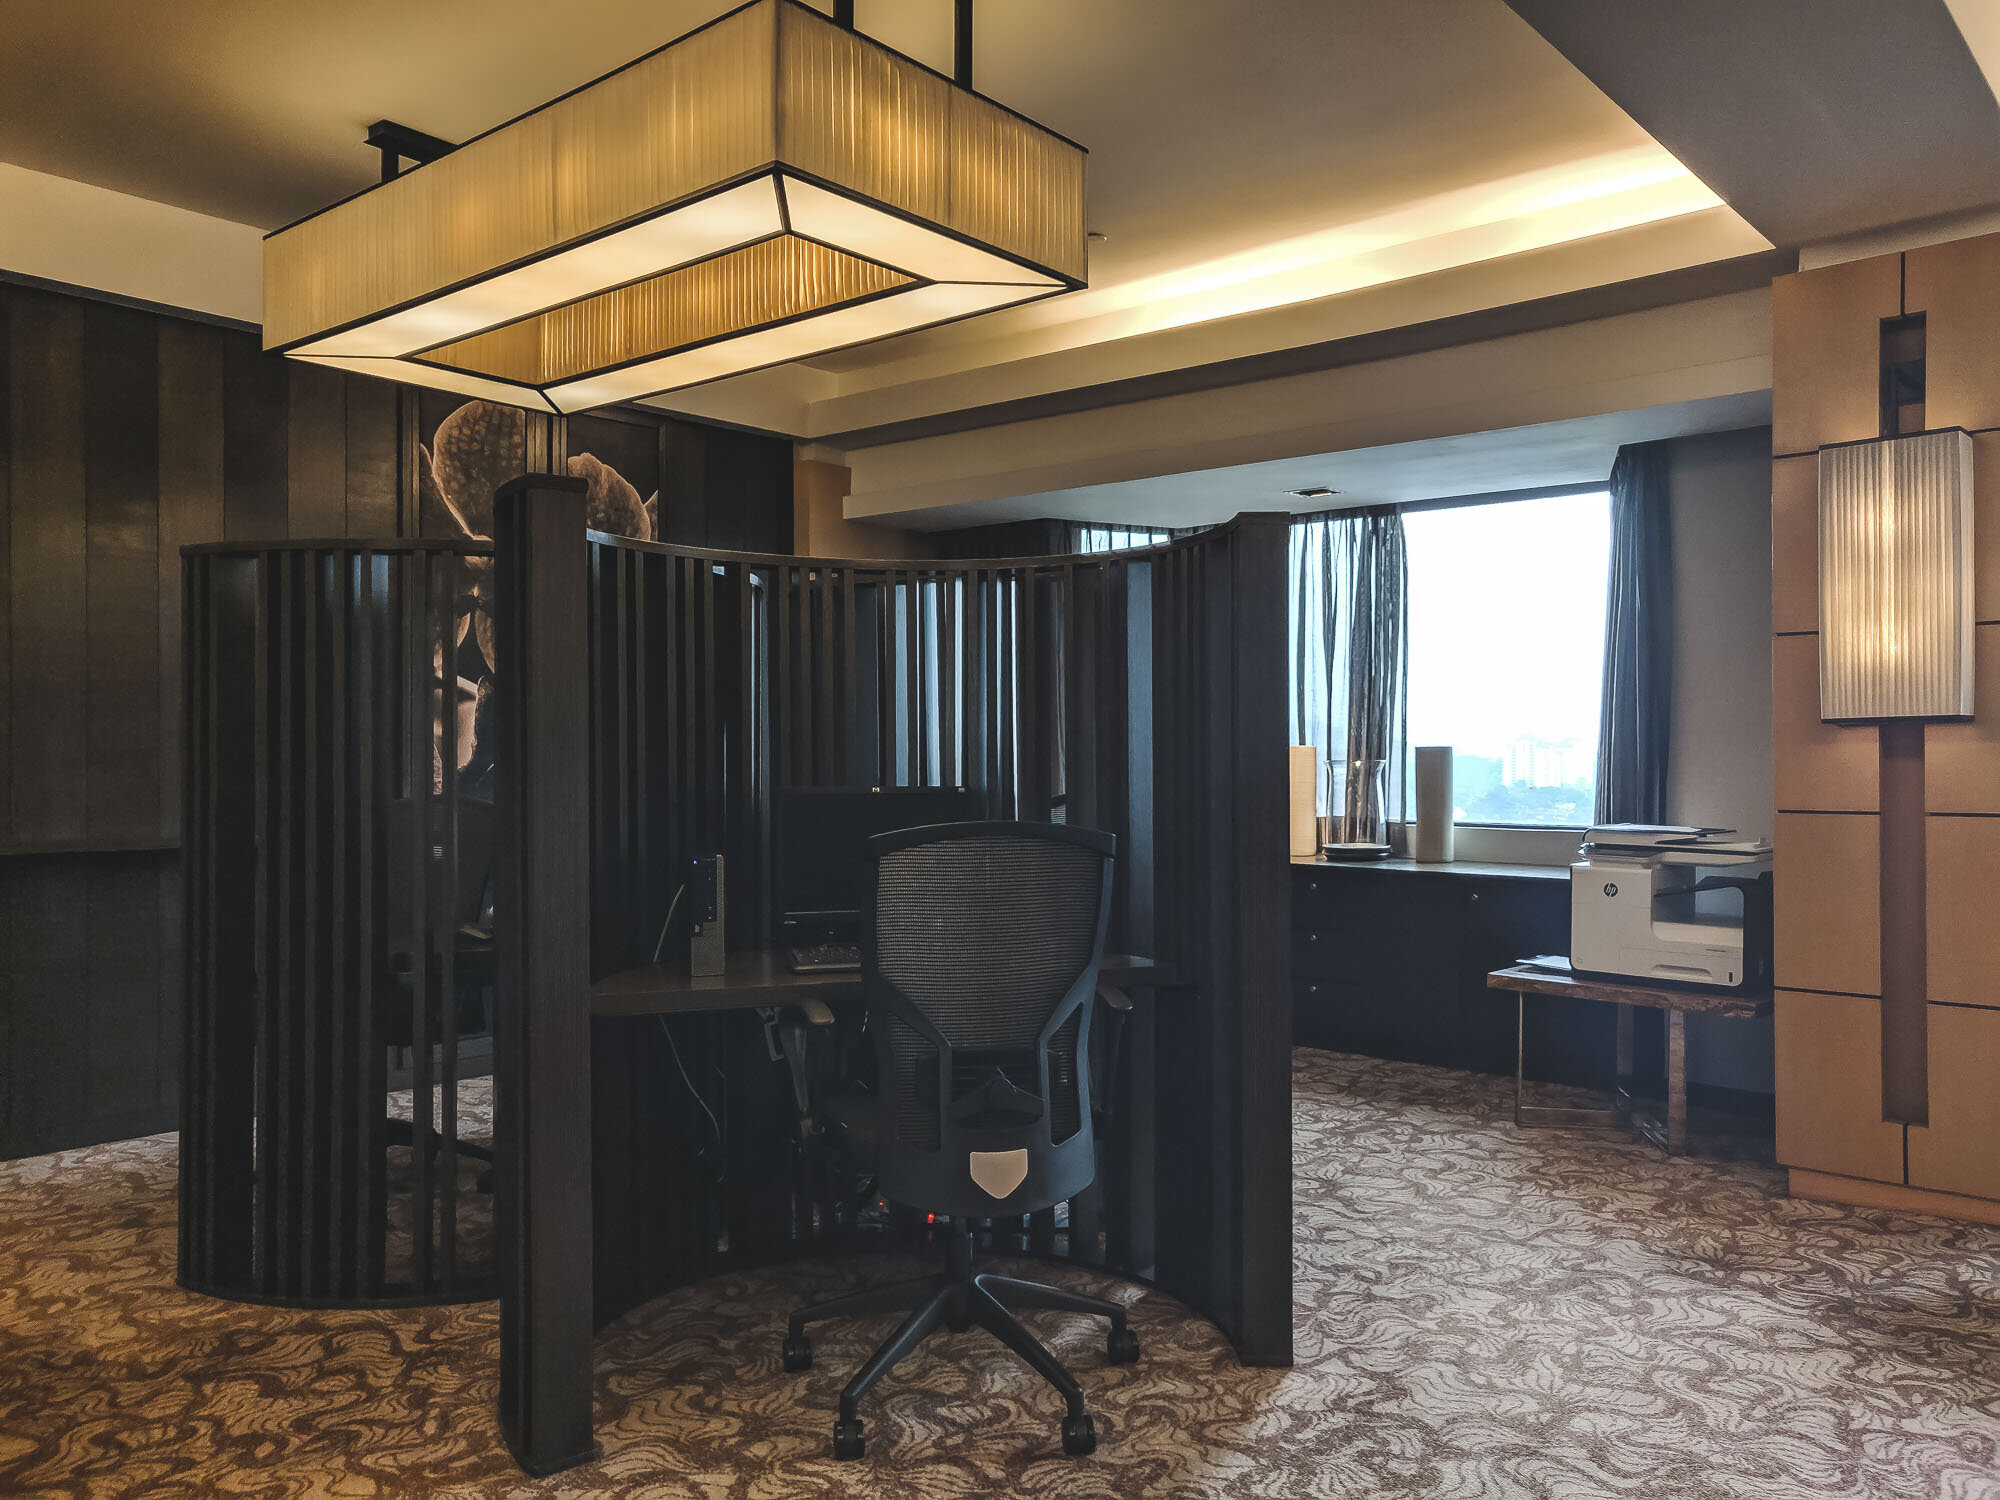 Business Center in the Executive Lounge